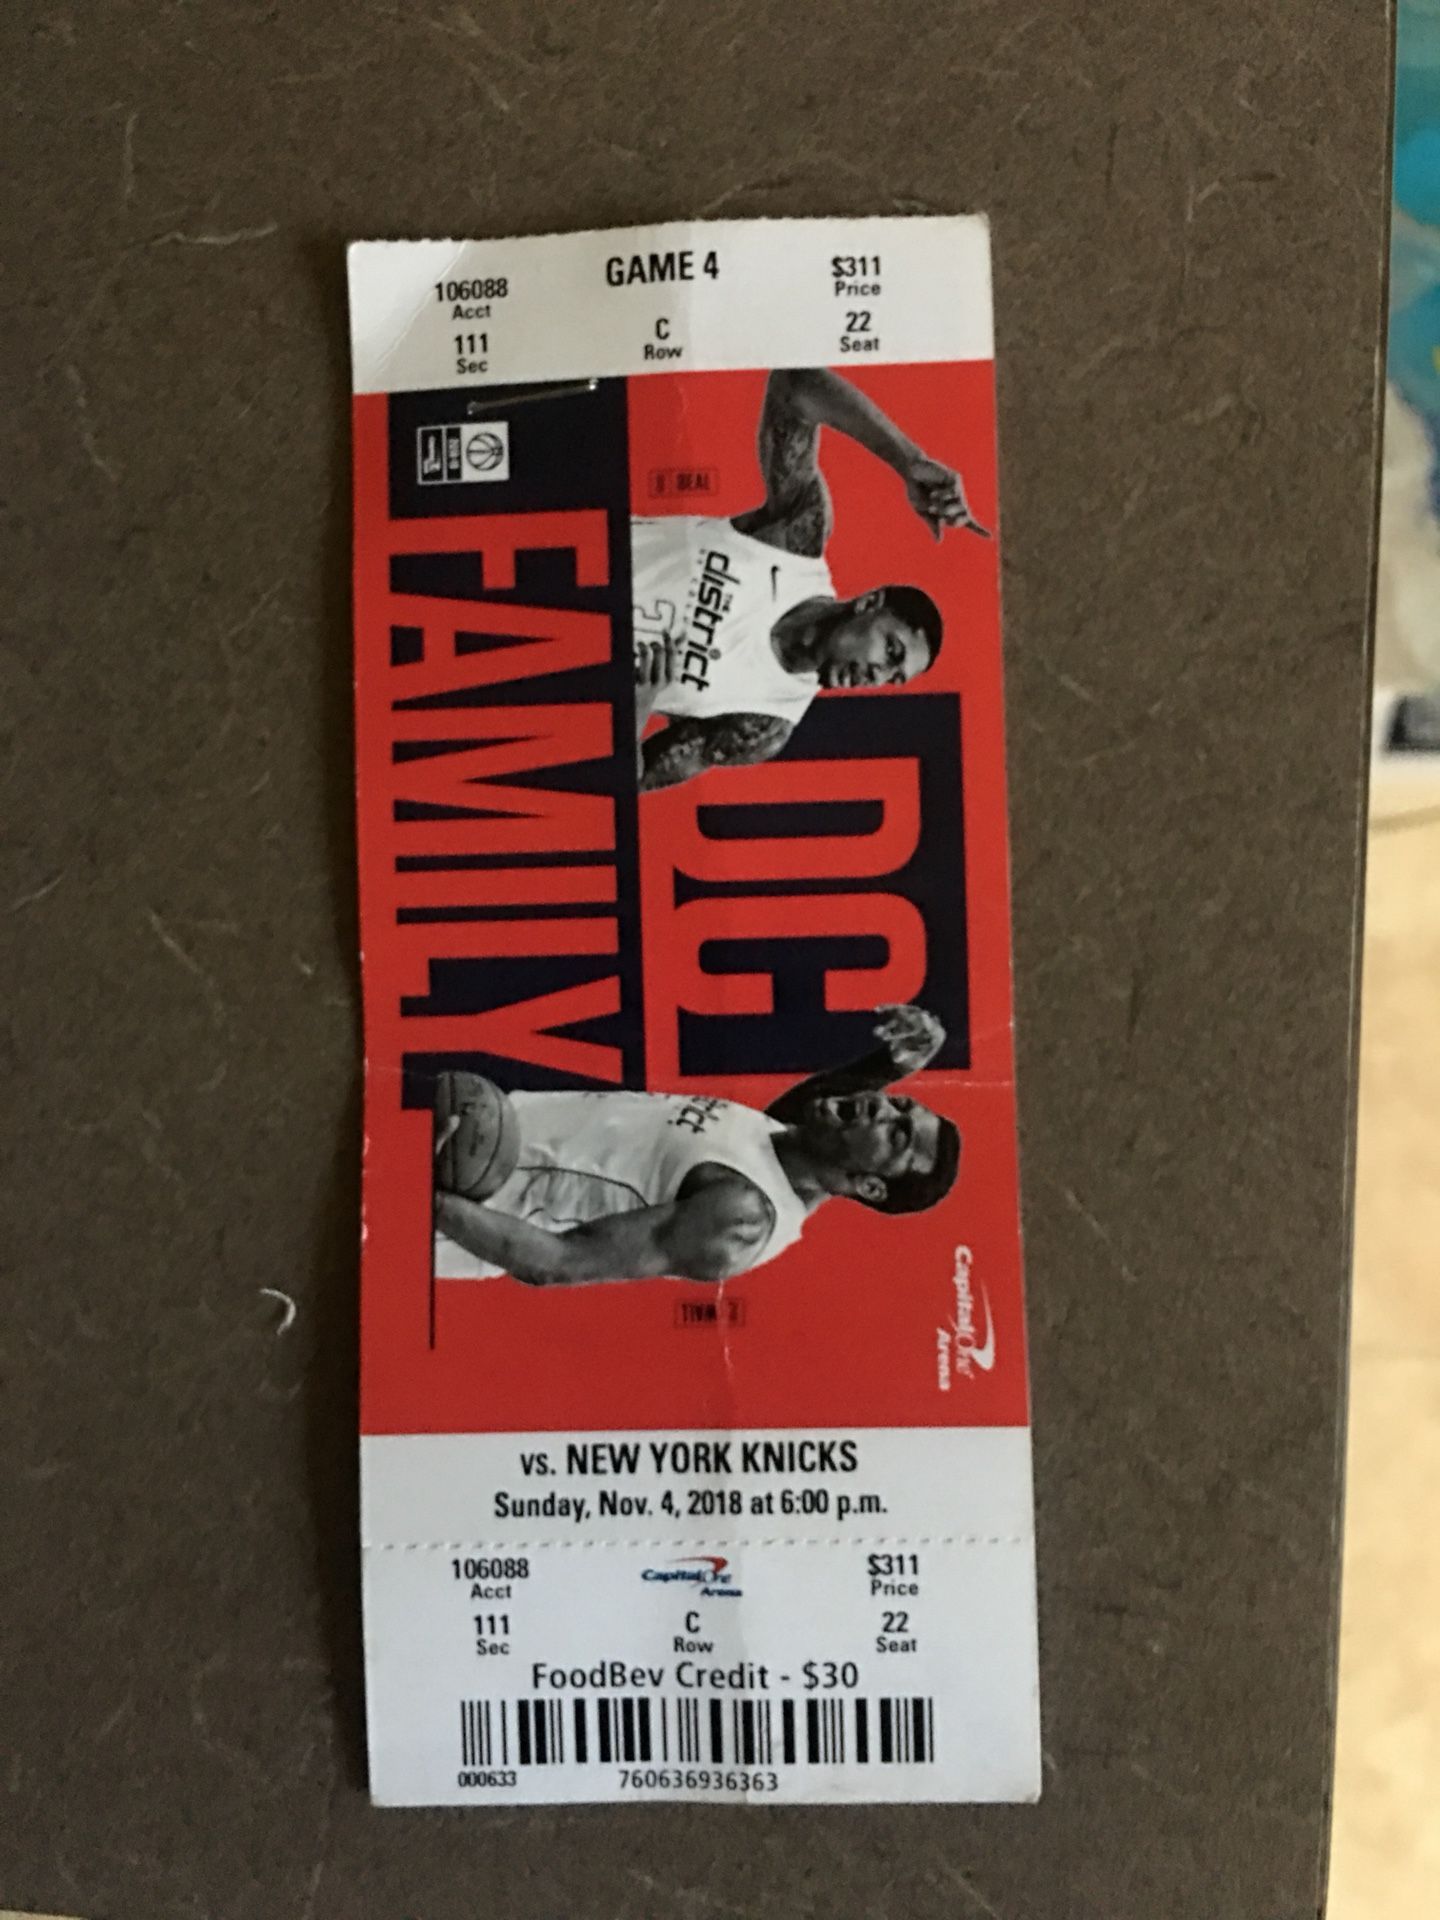 2 tickets great seats and 30$ food credit